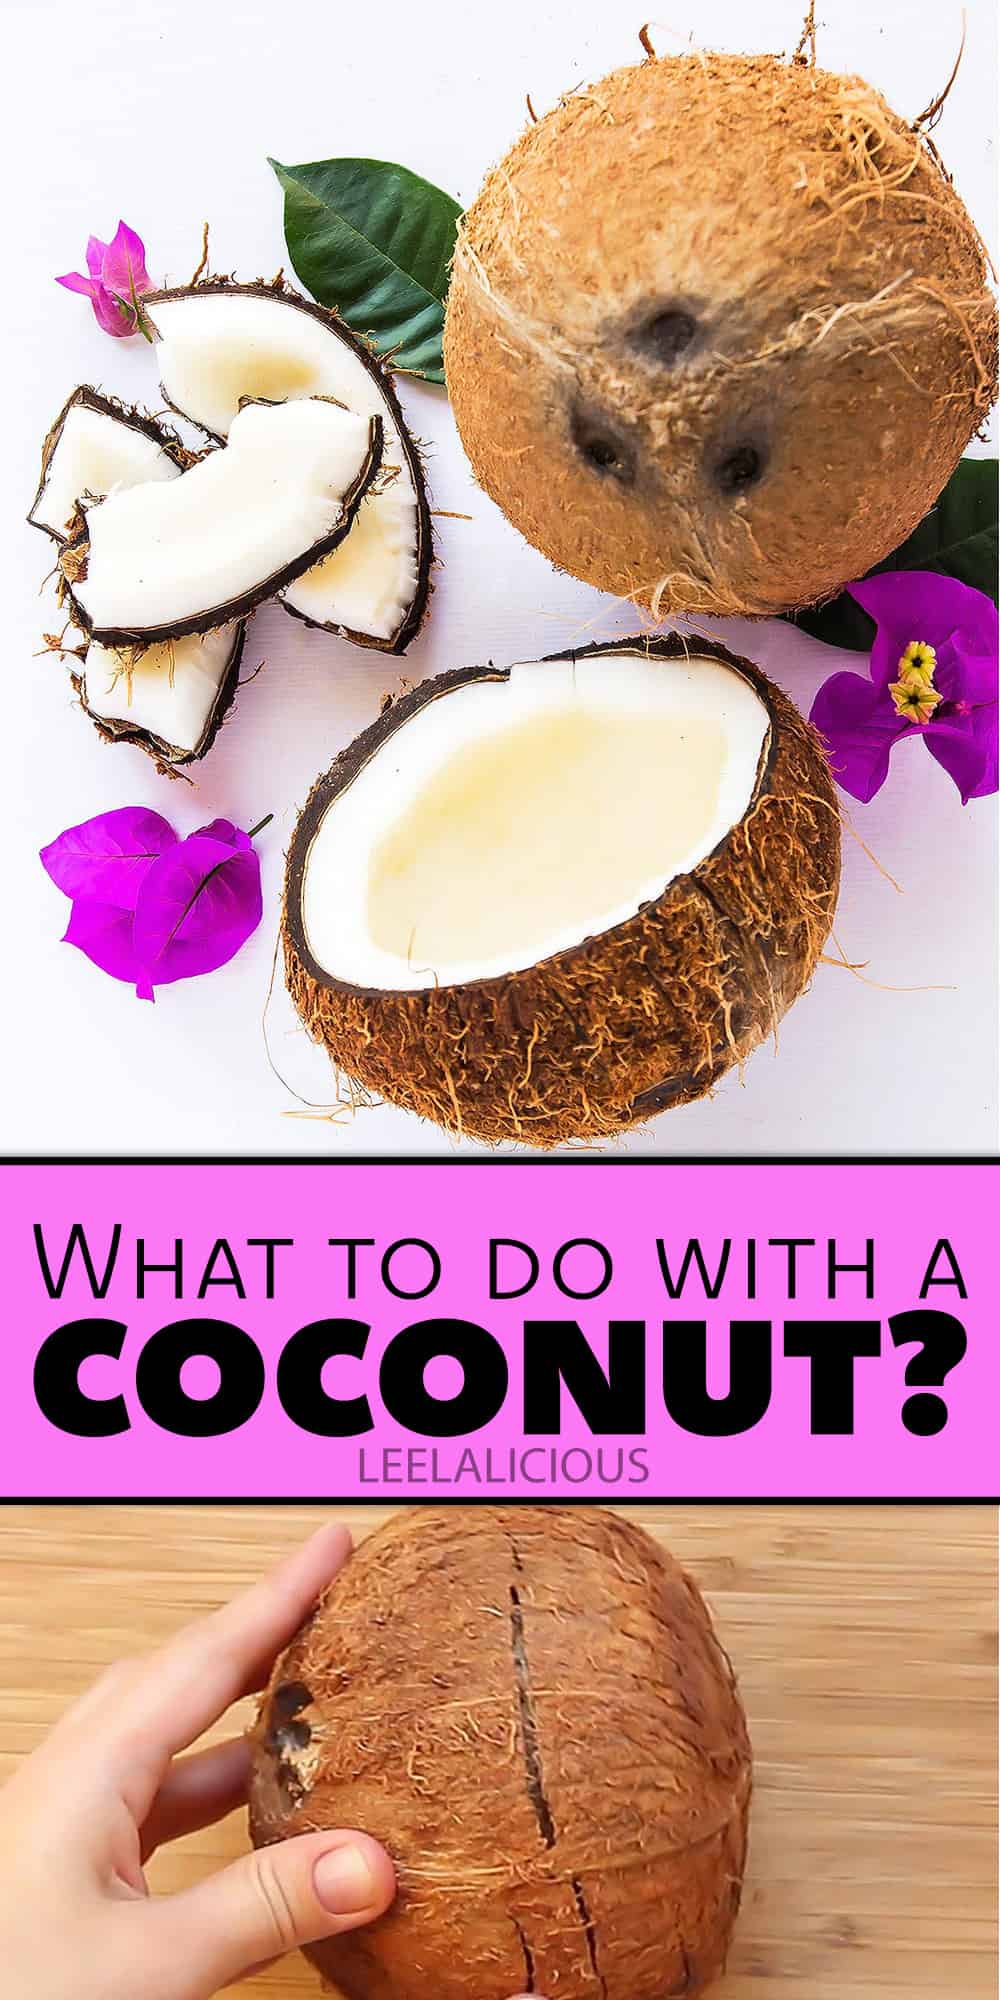 What to do with a coconut?